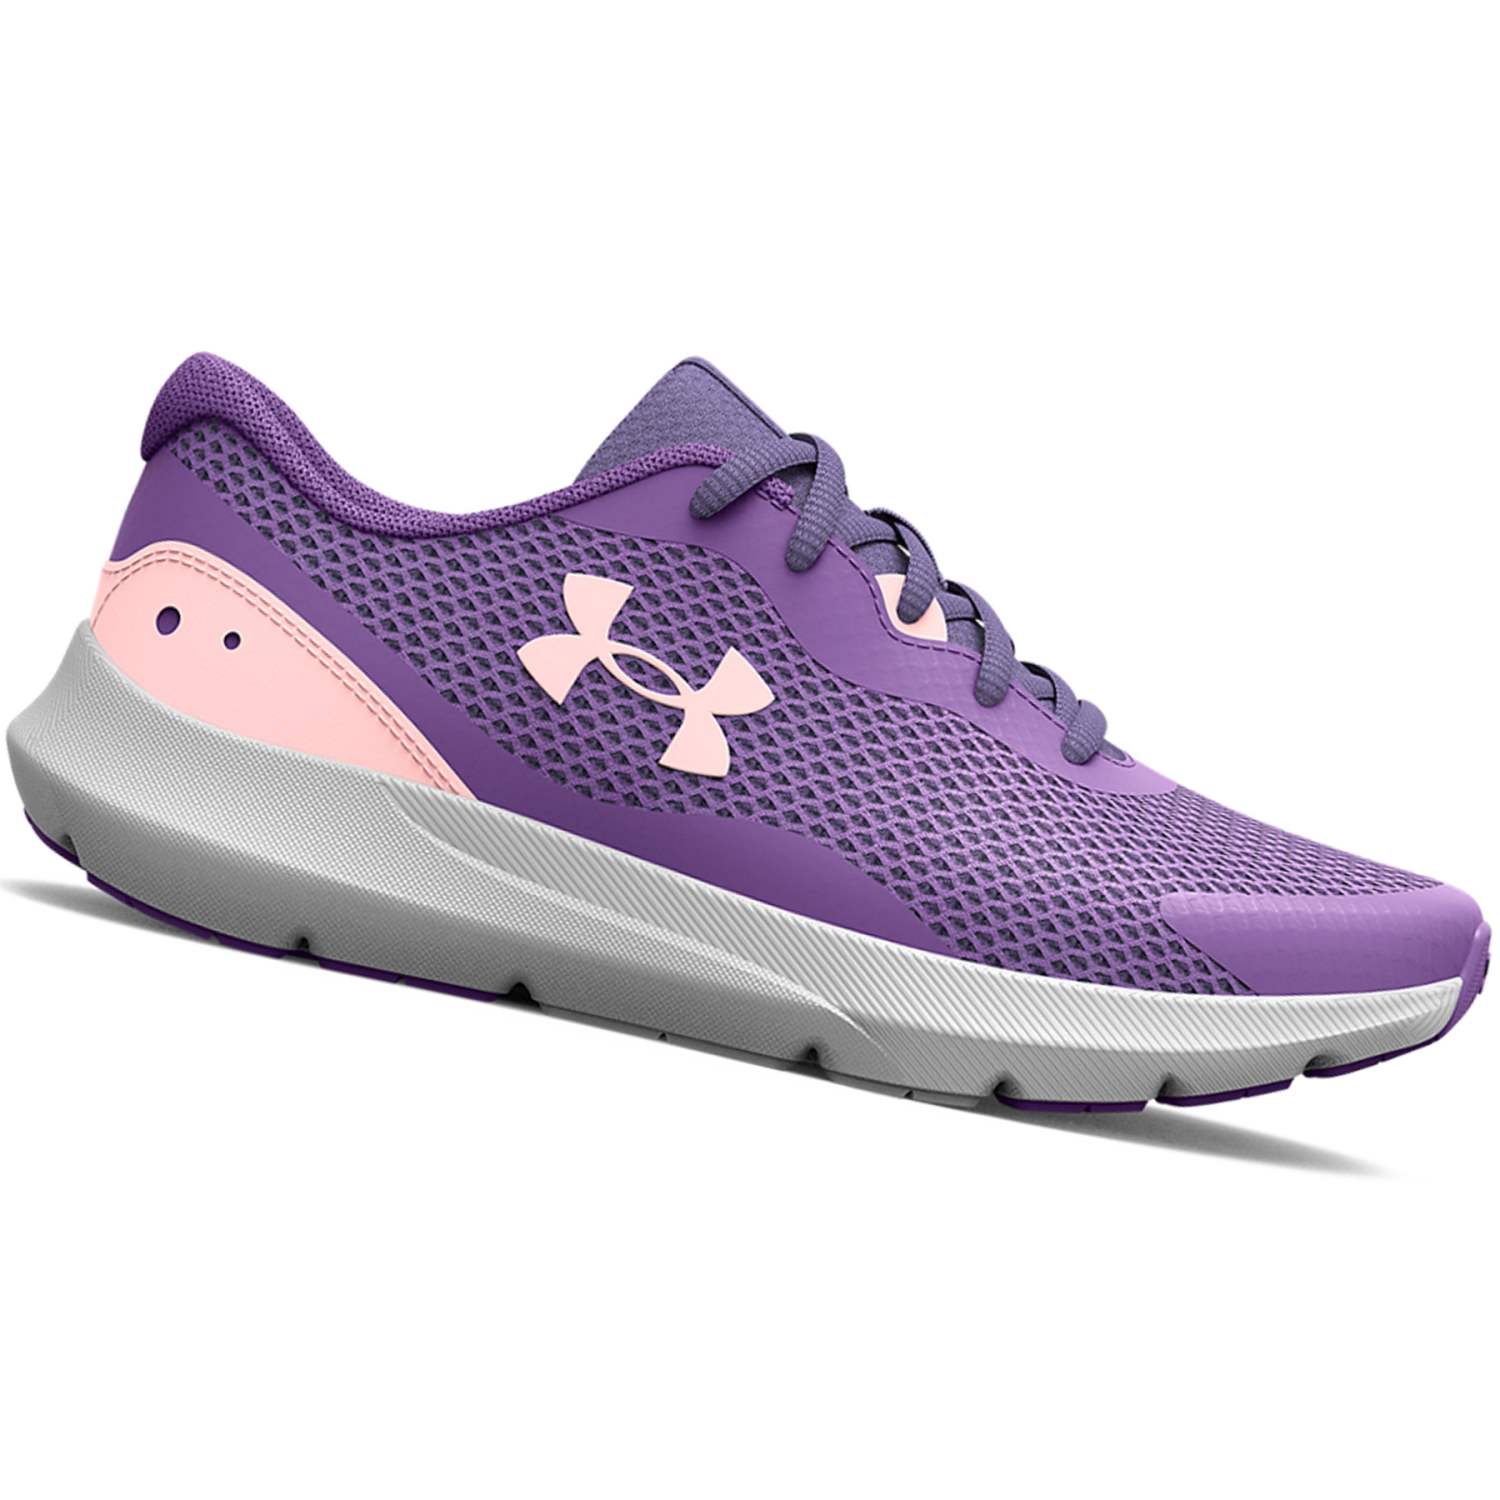 Zapatillas Under Armour Mujer Running Victory - 3023640-602